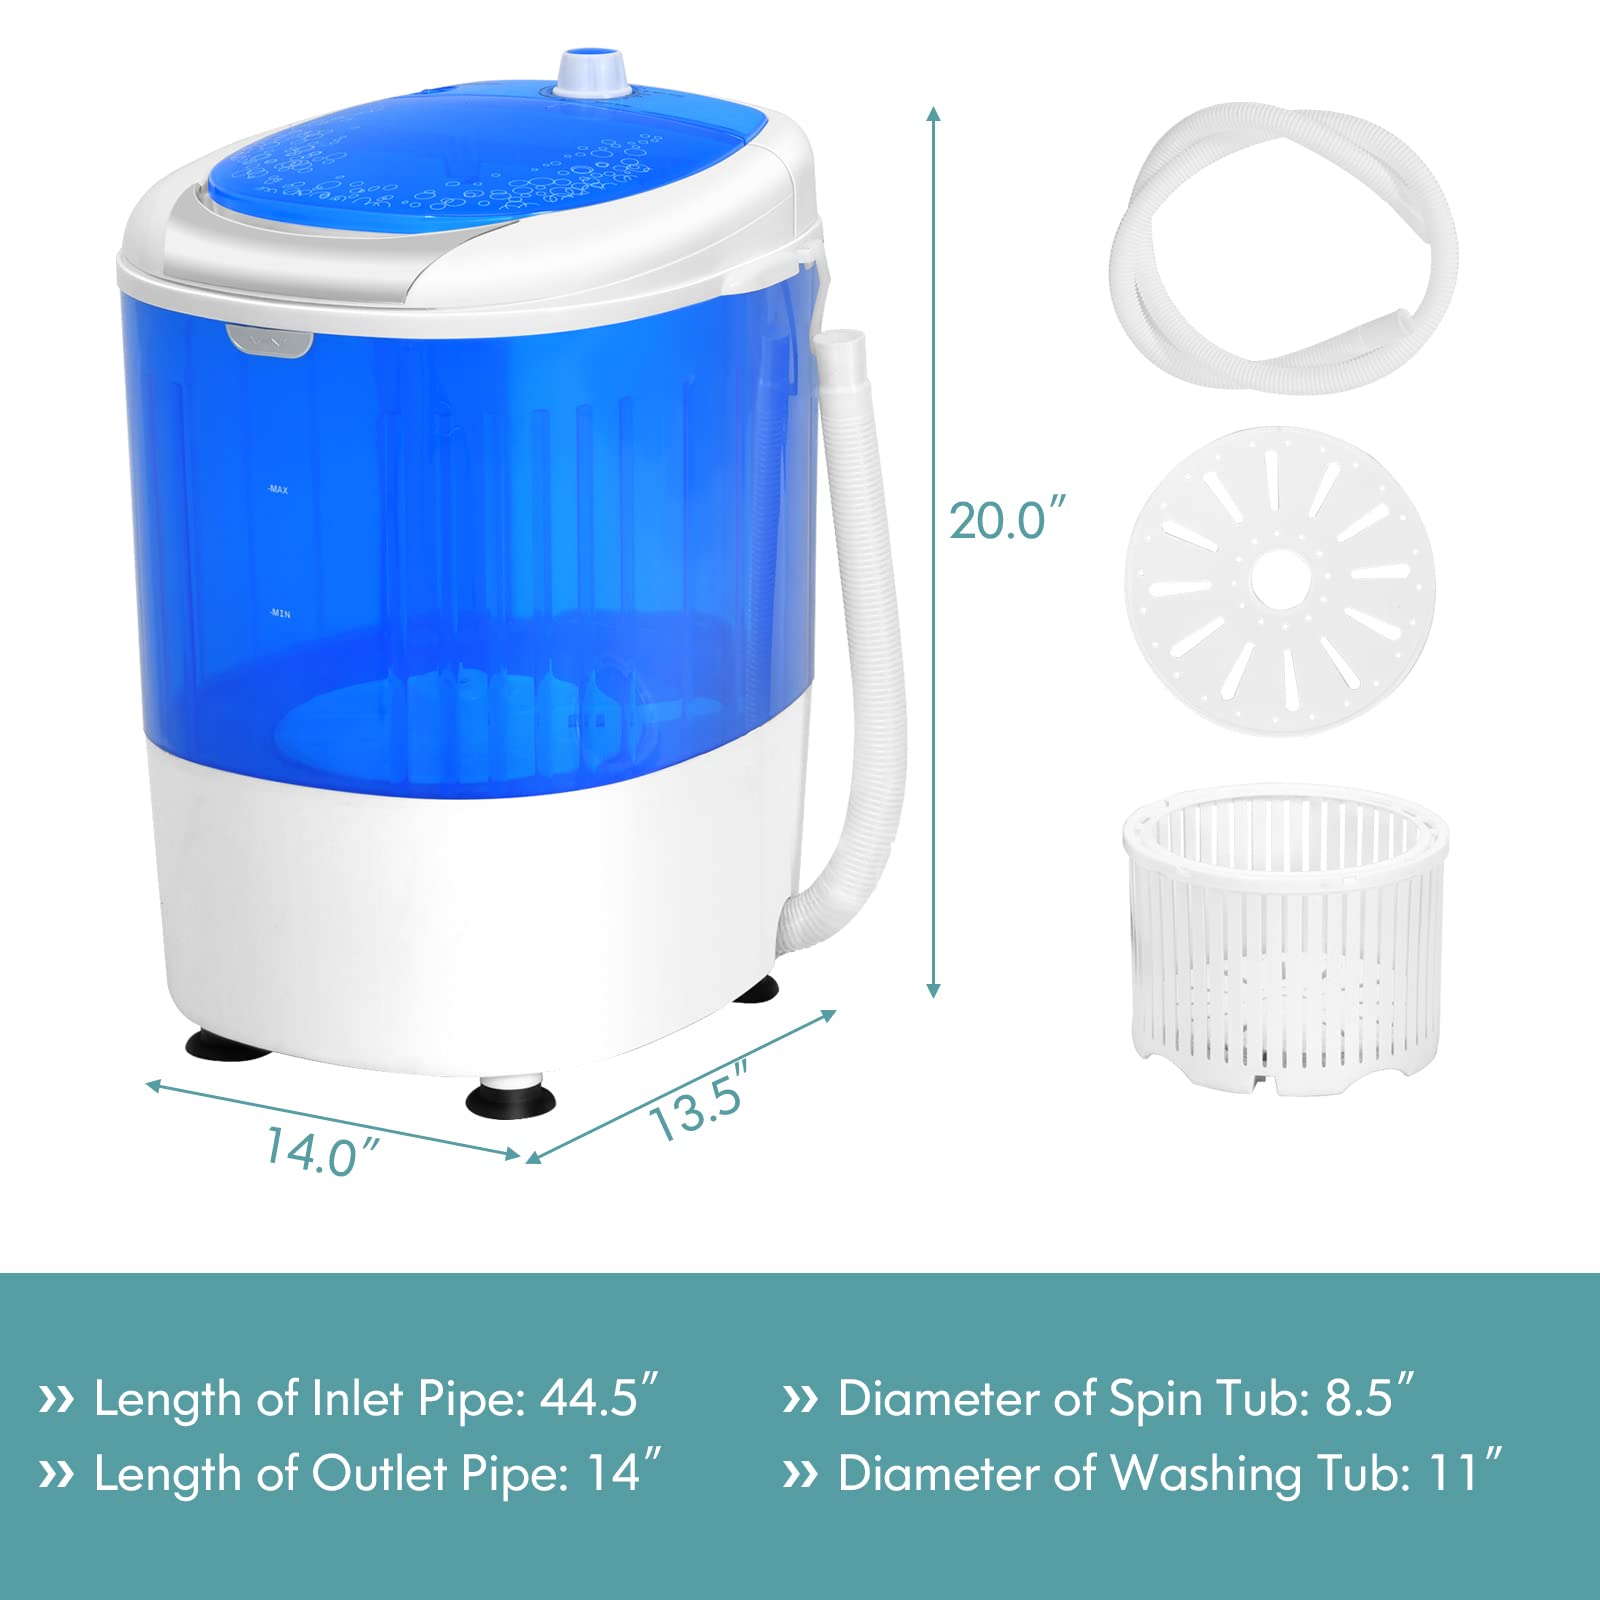 Giantex Portable Compact Washing Machine - EP24170-DT for sale online